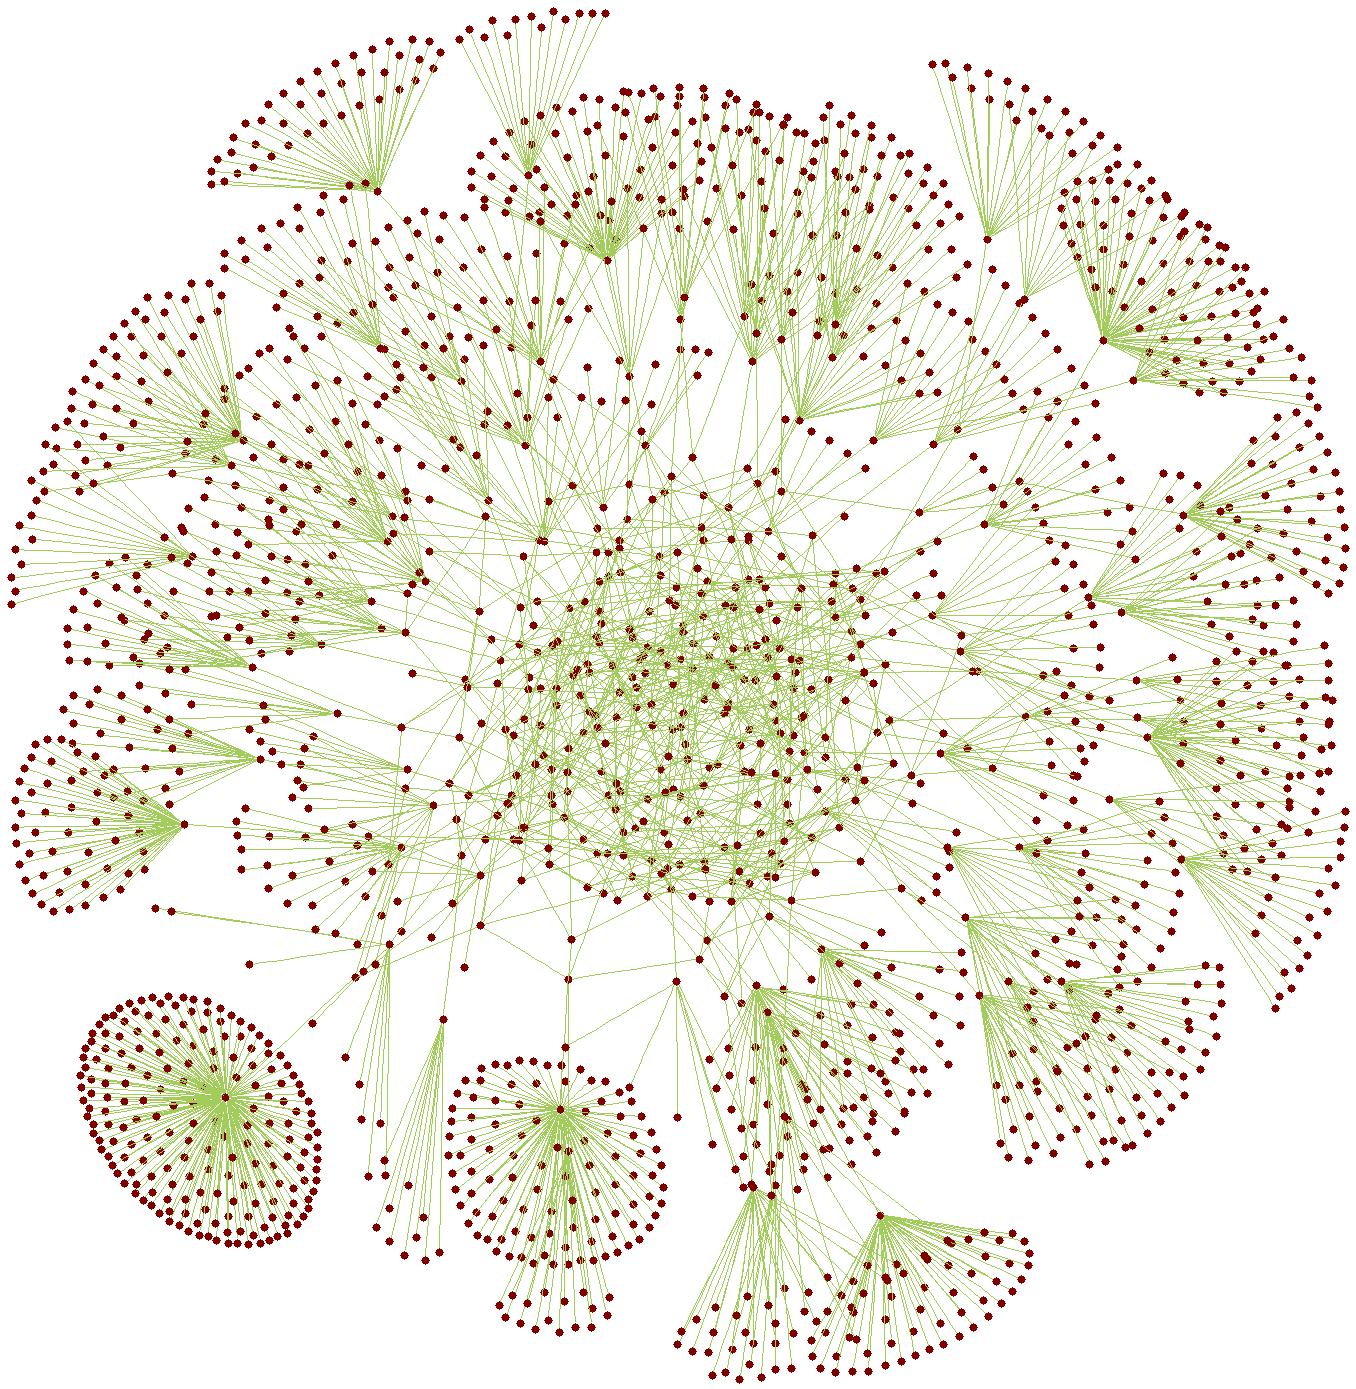 Dandelion-like Graph of Internet from UC San Diego Jacobs School of Engineering, 